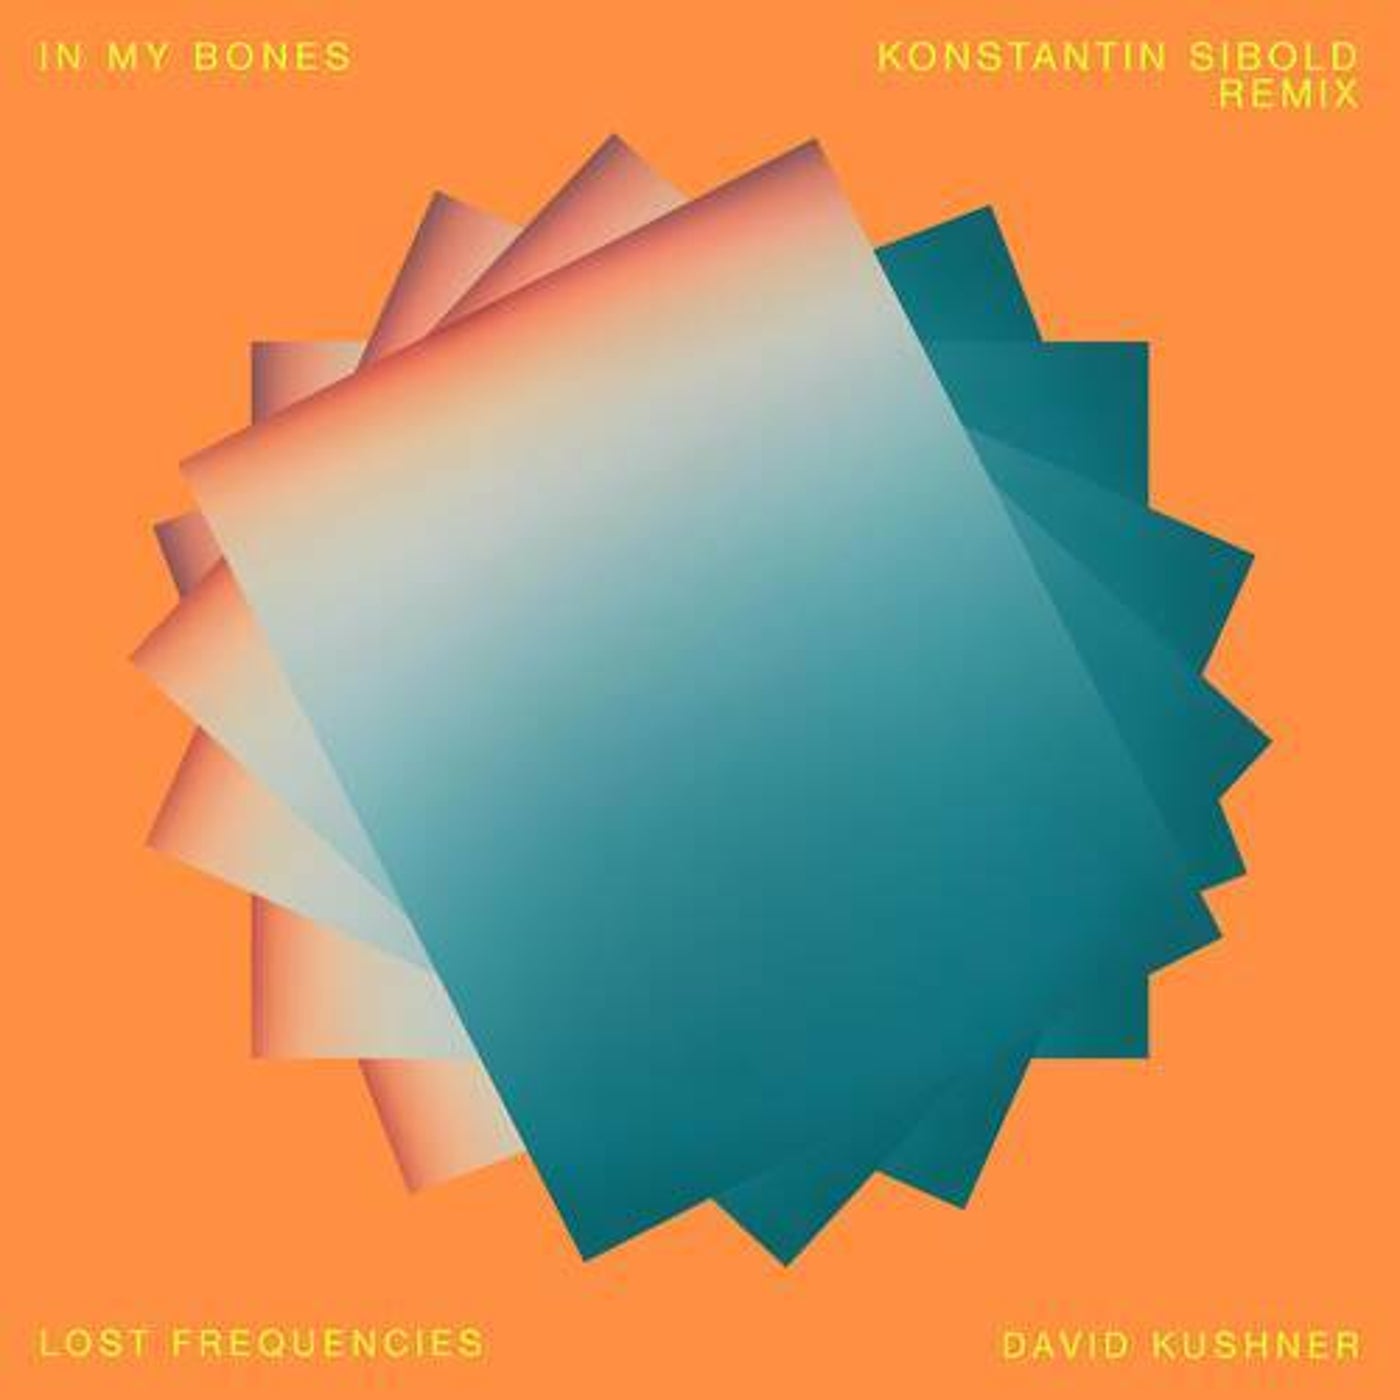 image cover: Lost Frequencies, David Kushner, Lost Frequencies, David Kushner - In My Bones (Konstantin Sibold Remix Extended) on Epic Amsterdam